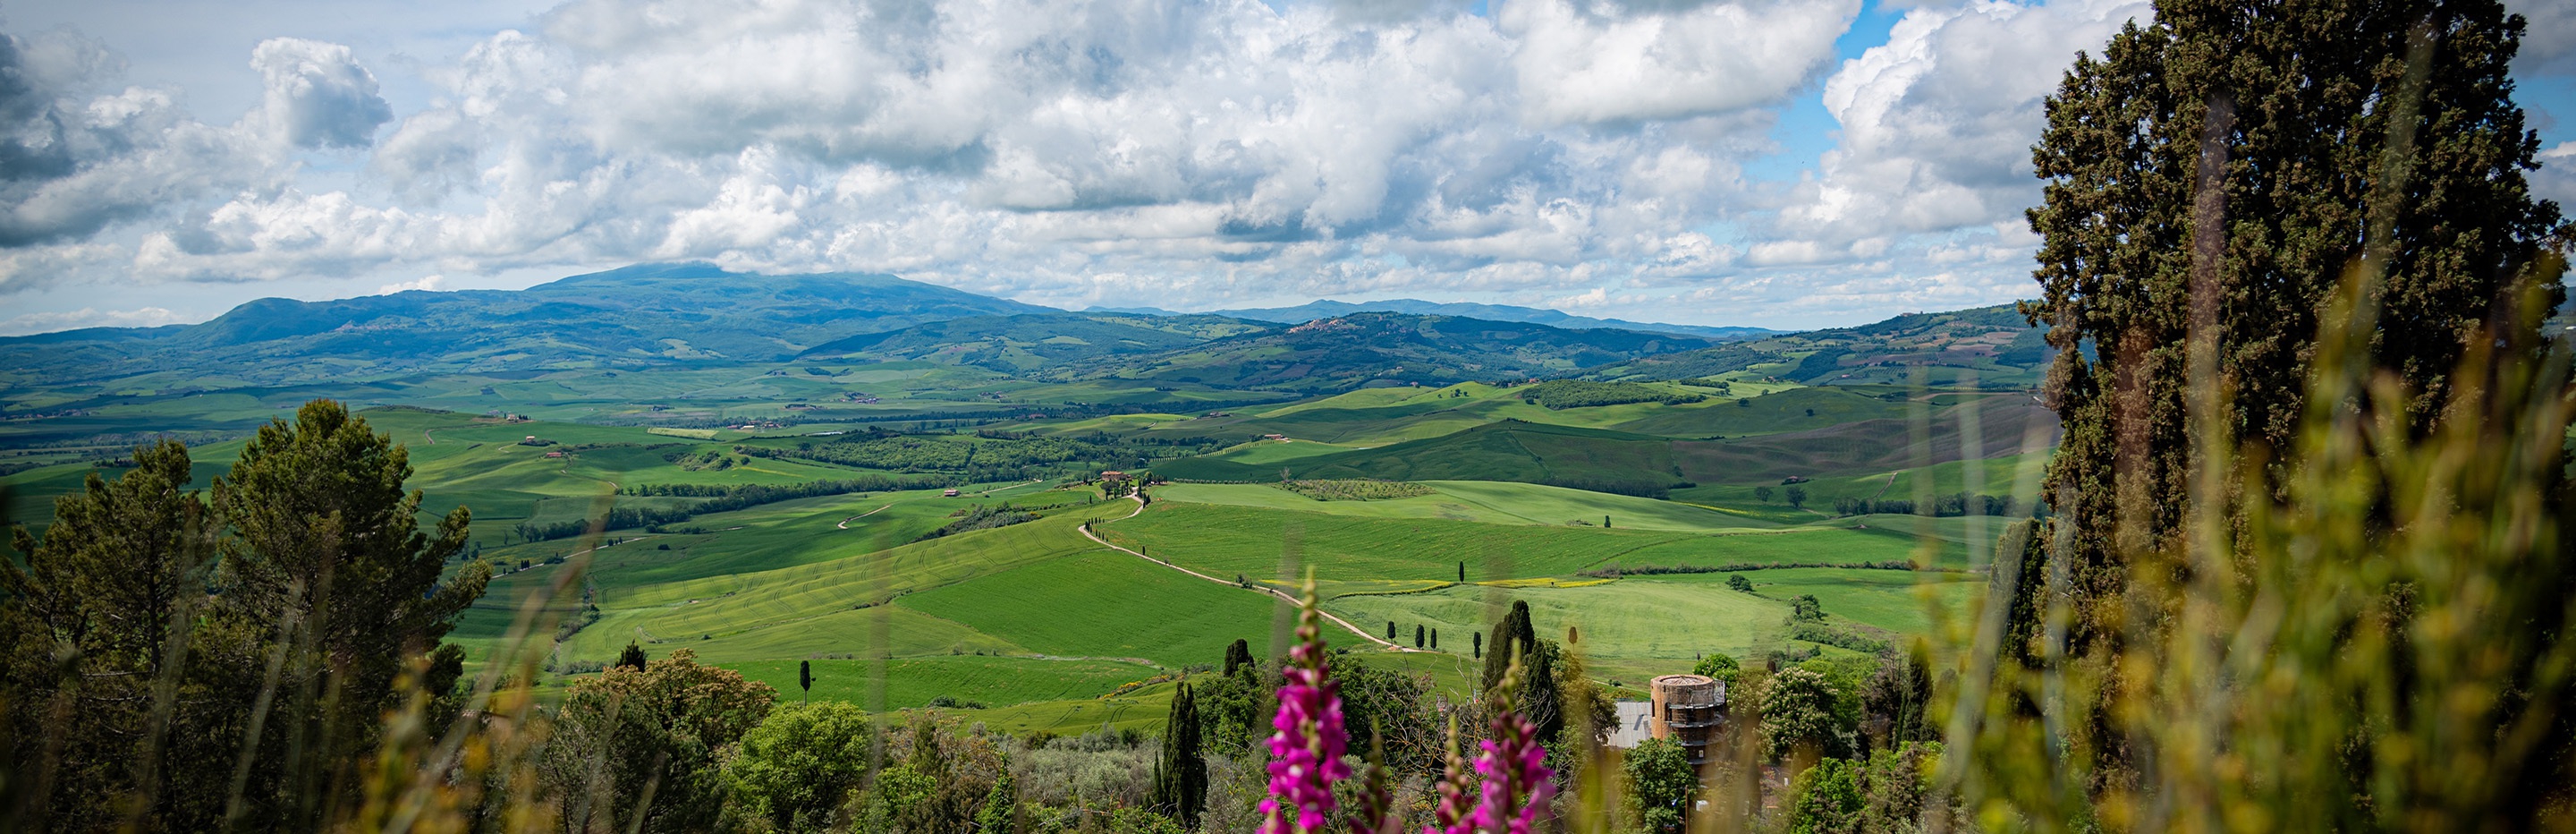 Panoramic landscape view of Val d'Orcia in Tuscany, Italy